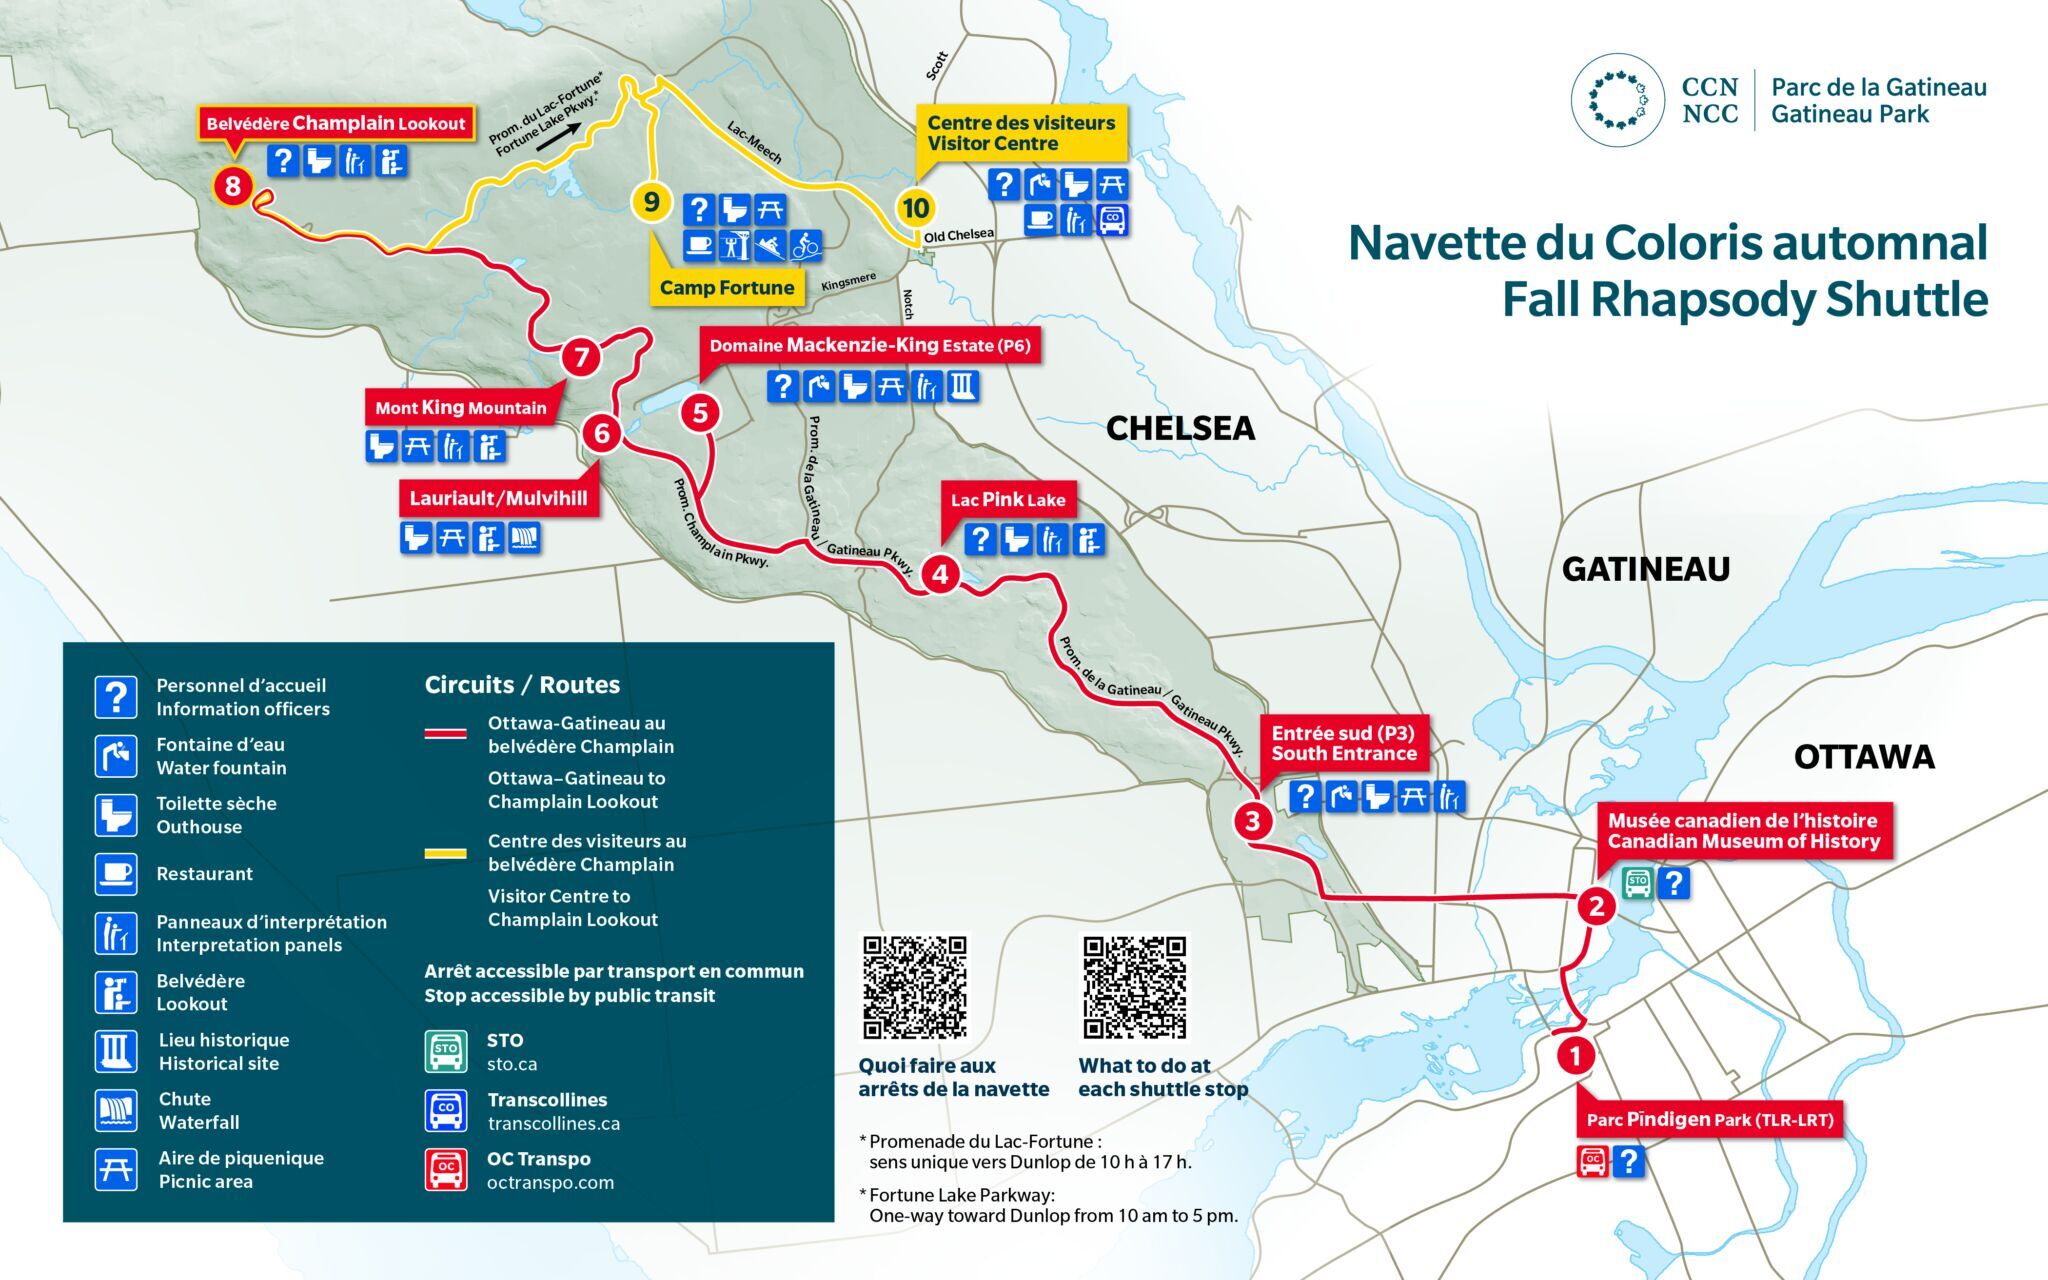 Gatineau Park shuttle bus map showing route from Ottawa to Champlain Lookout, and departure from the Visitor Centre to Champlain Lookout, and to popular destinations such as Pink Lake and King Mountain.